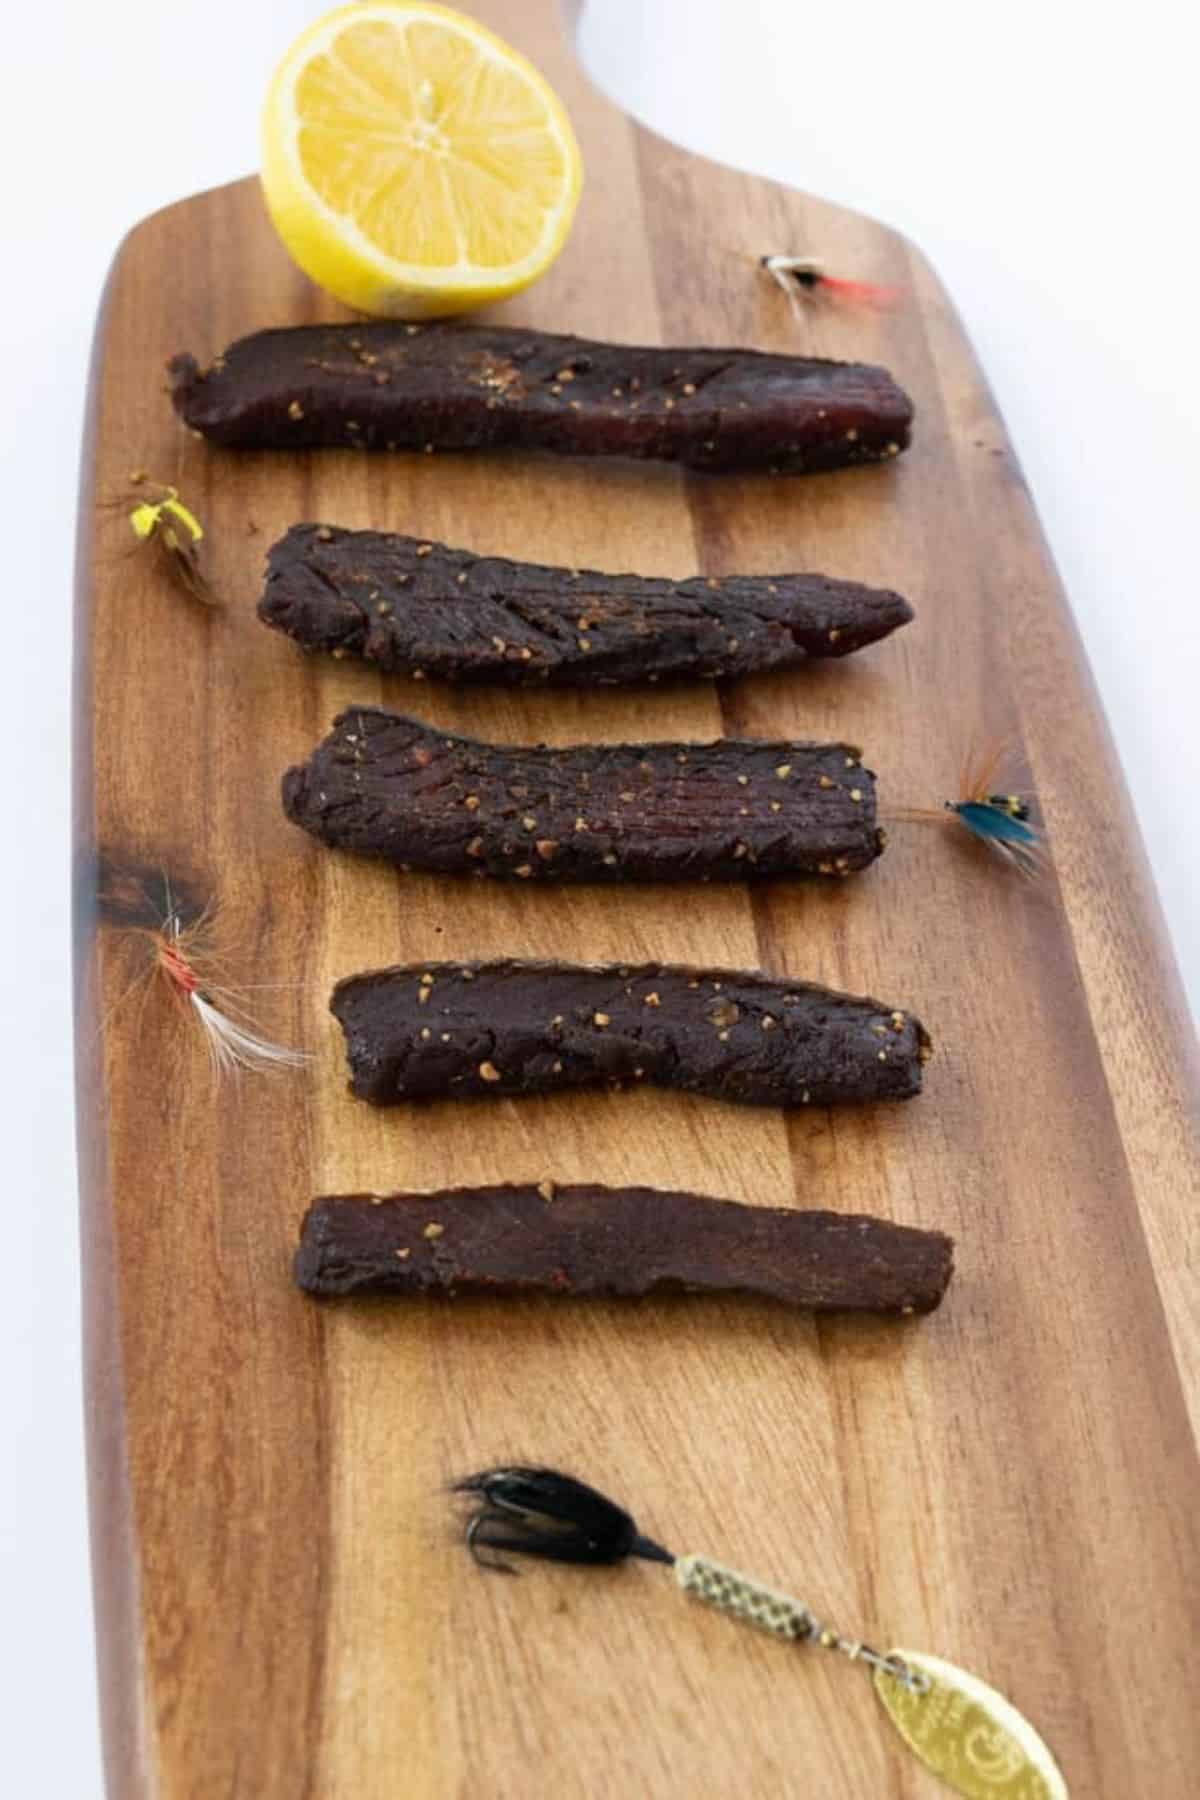 Salmon jerky with a halve of lemon on a wooden cutting board.